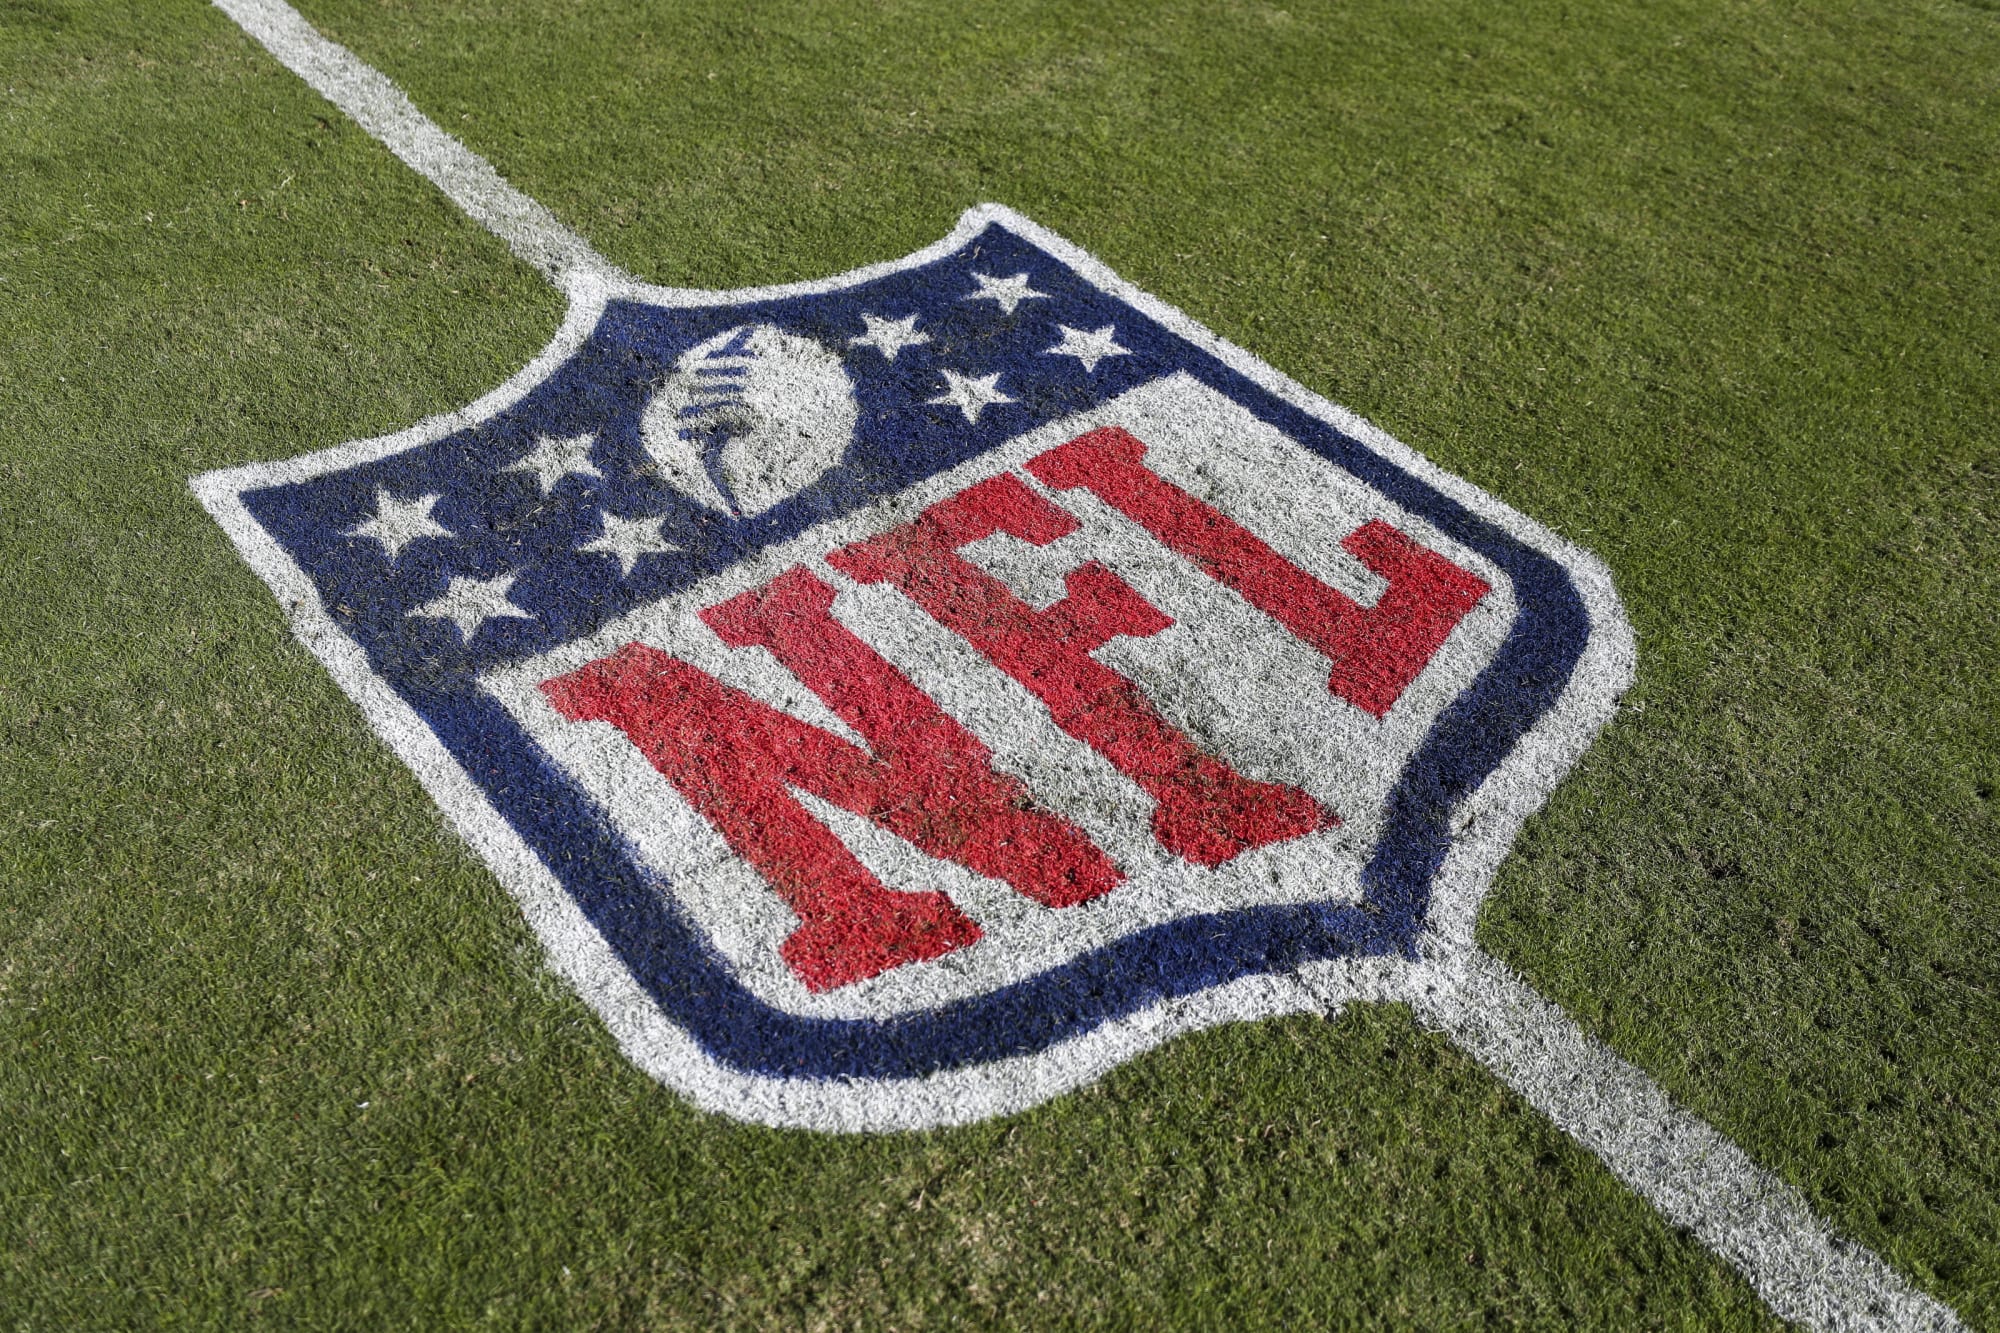 Yet another NFL stadium is moving away from natural grass